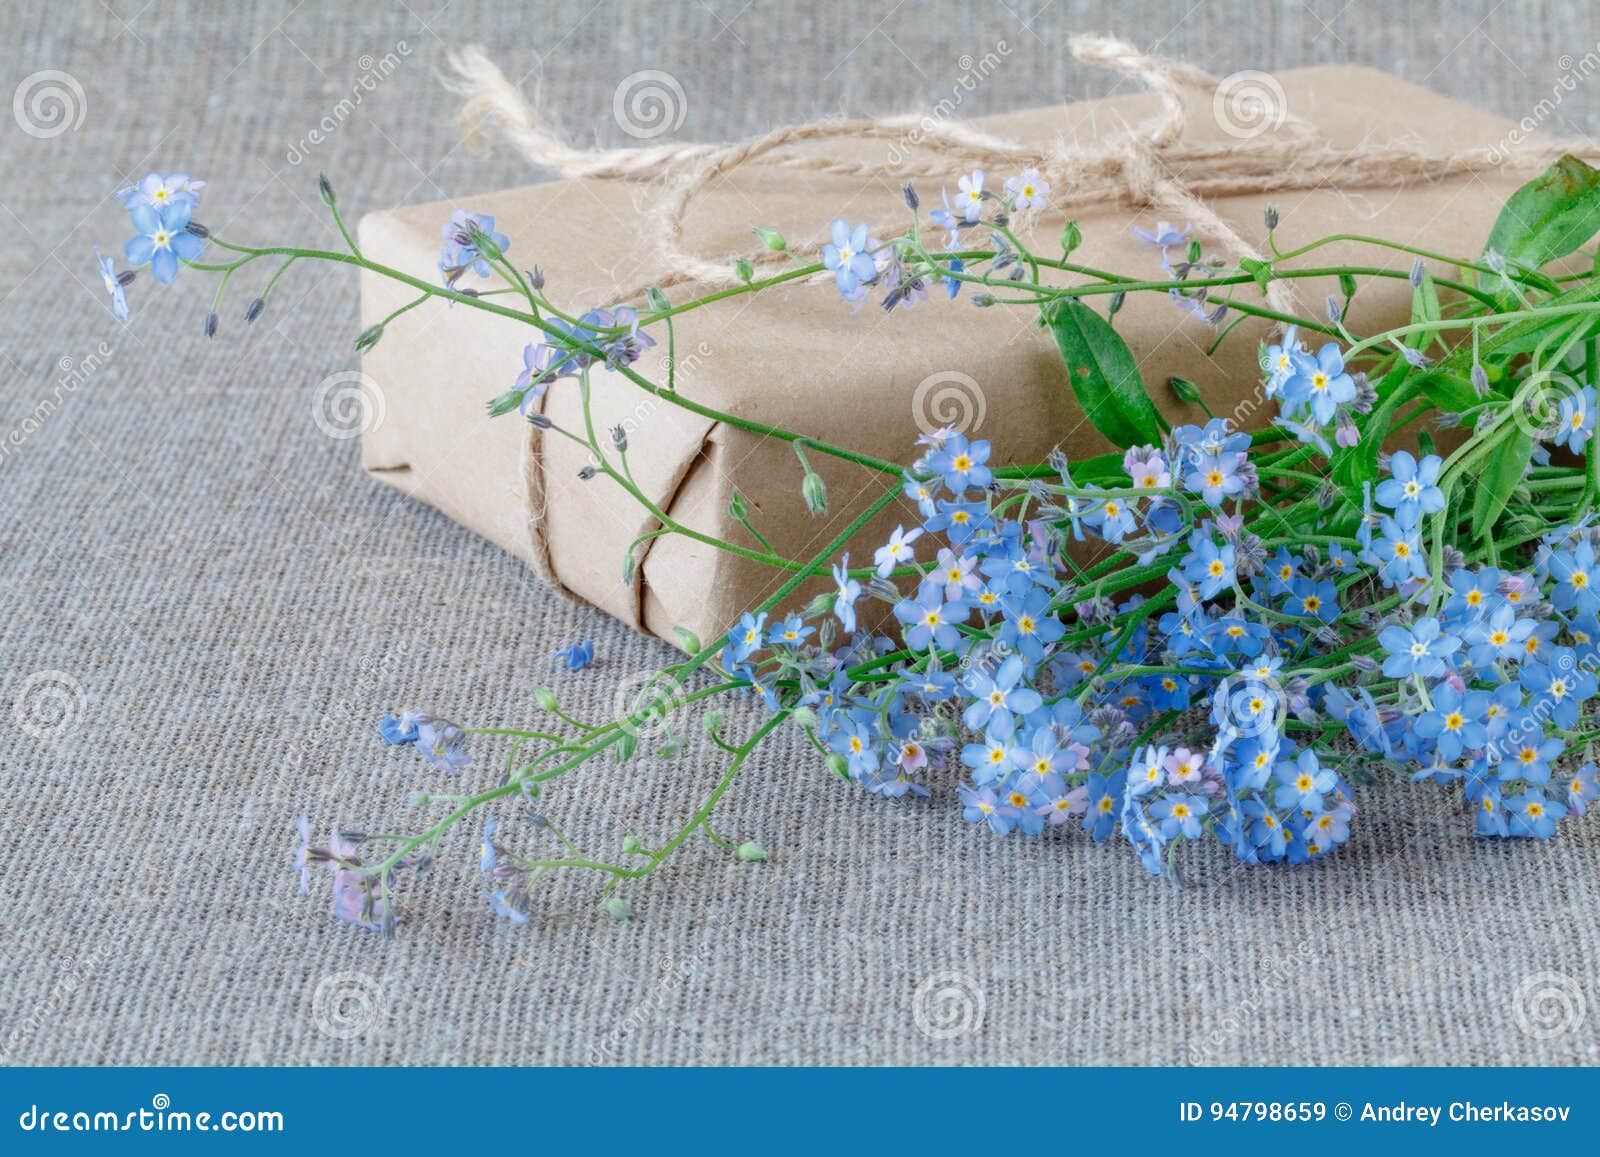 Forget-me-not Gift Of Seeds - Sow ʼn Sow